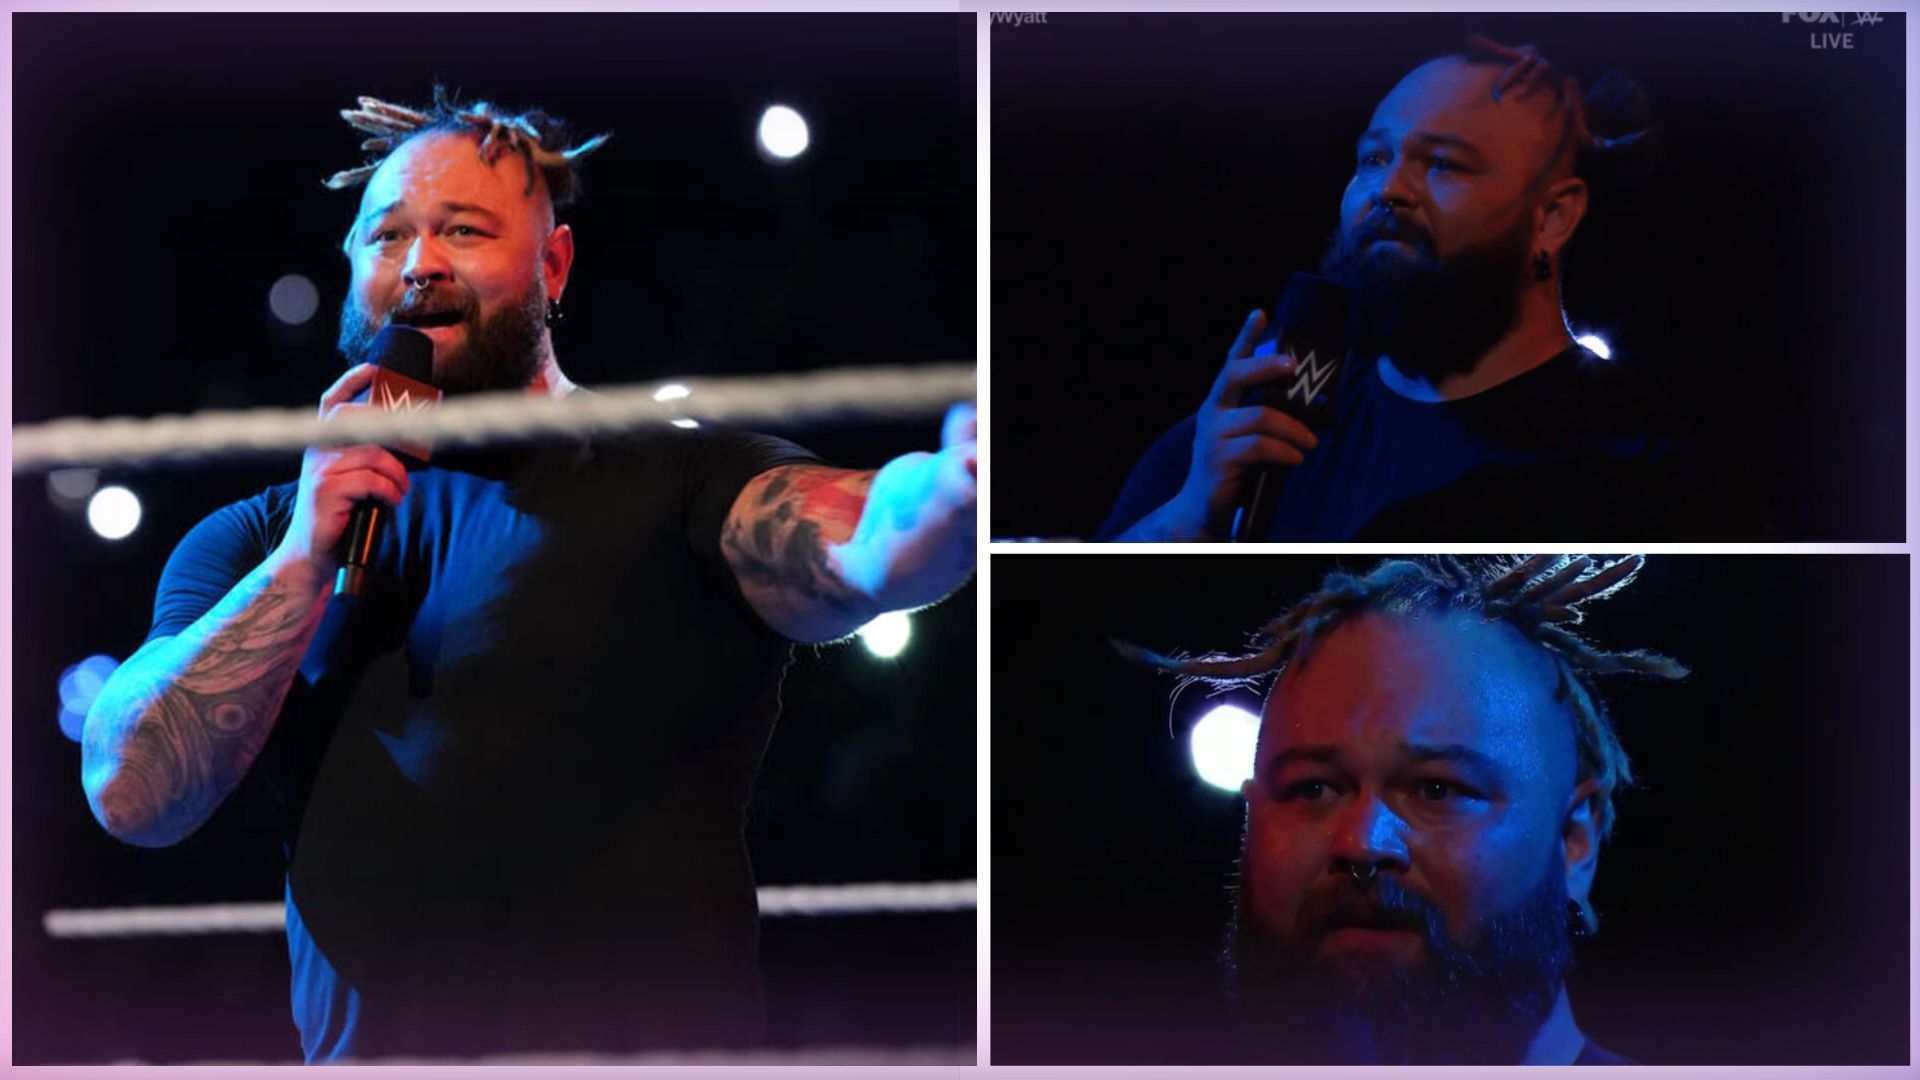 Bray Wyatt returned to WWE at Extreme Rules this year.